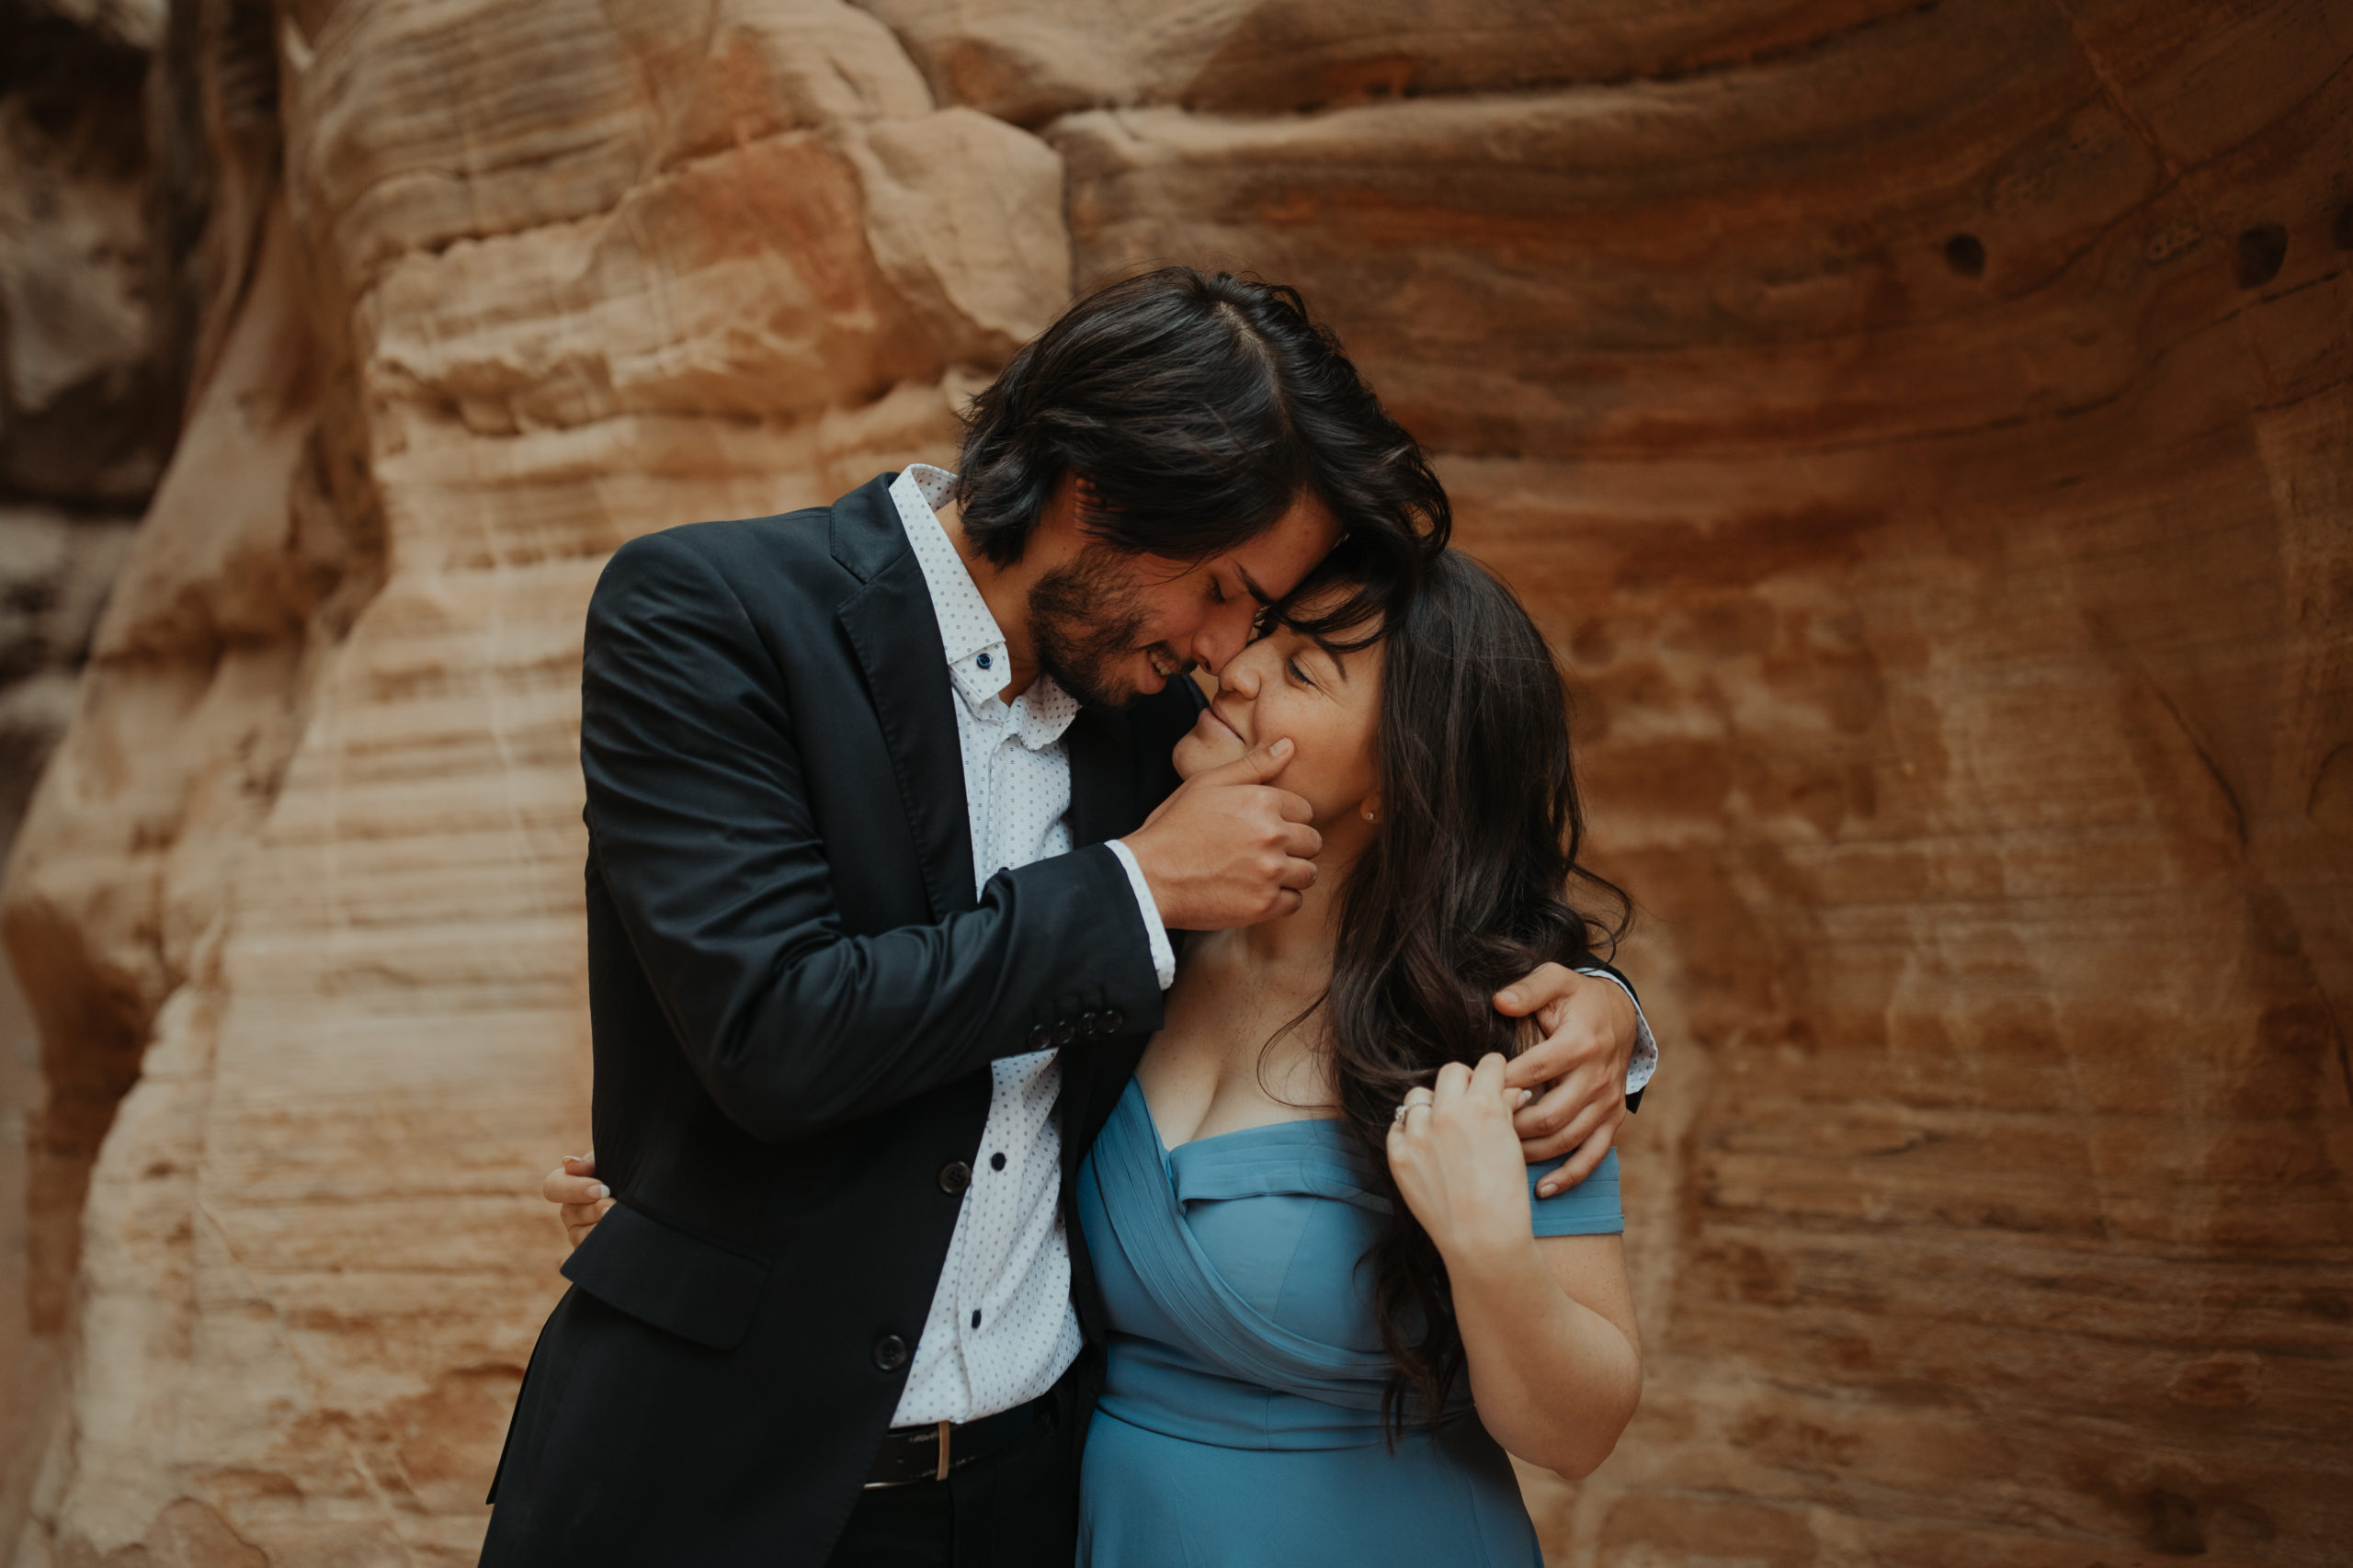 Couple kissing in canyon wearing formal attire